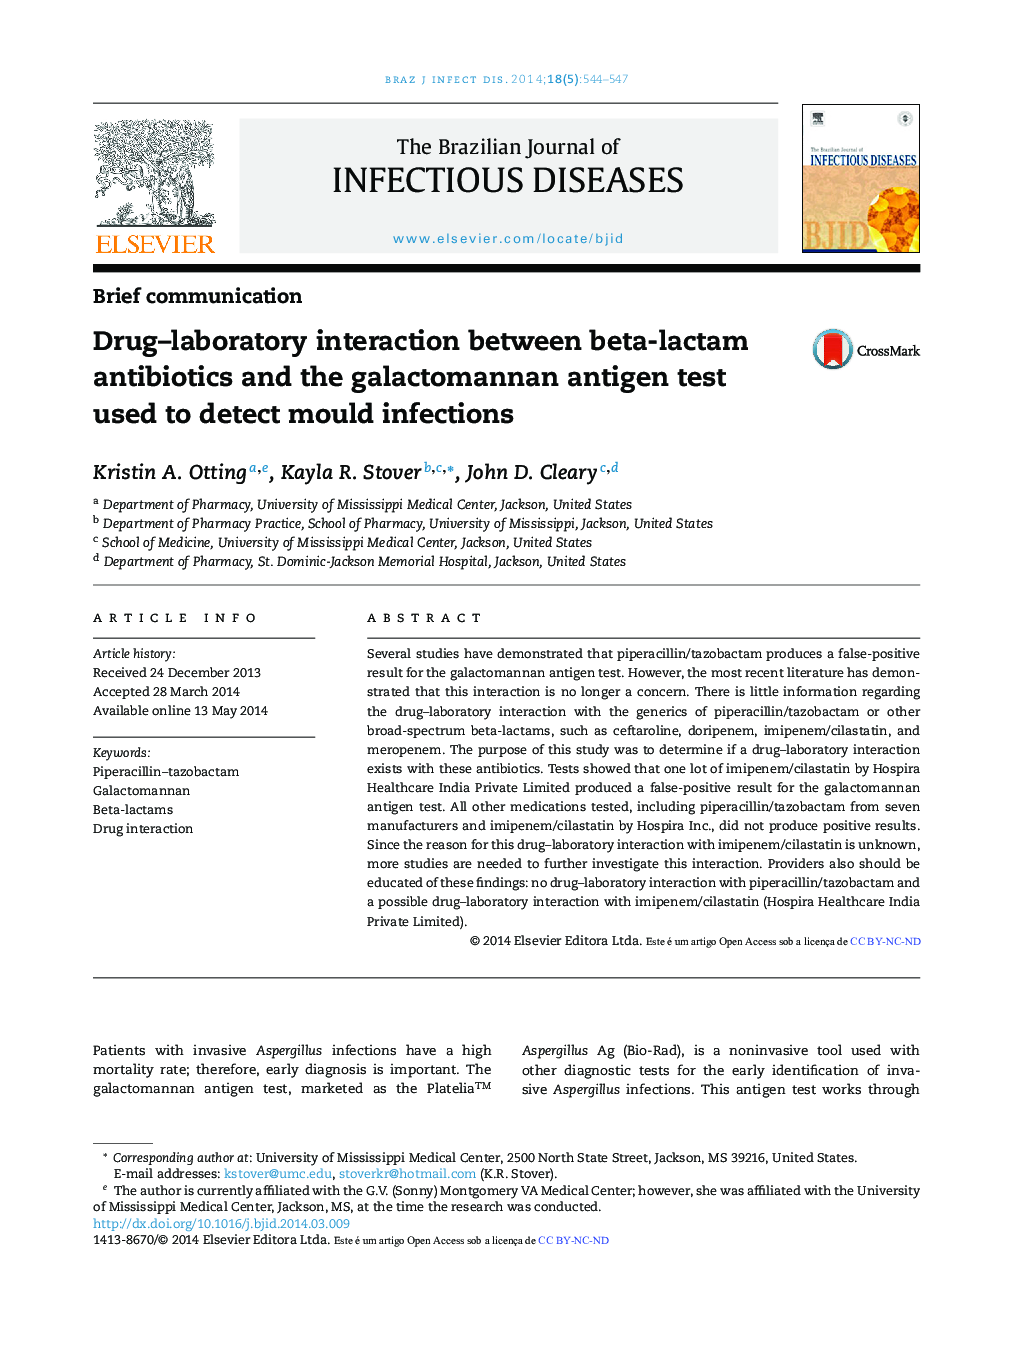 Drug–laboratory interaction between beta-lactam antibiotics and the galactomannan antigen test used to detect mould infections